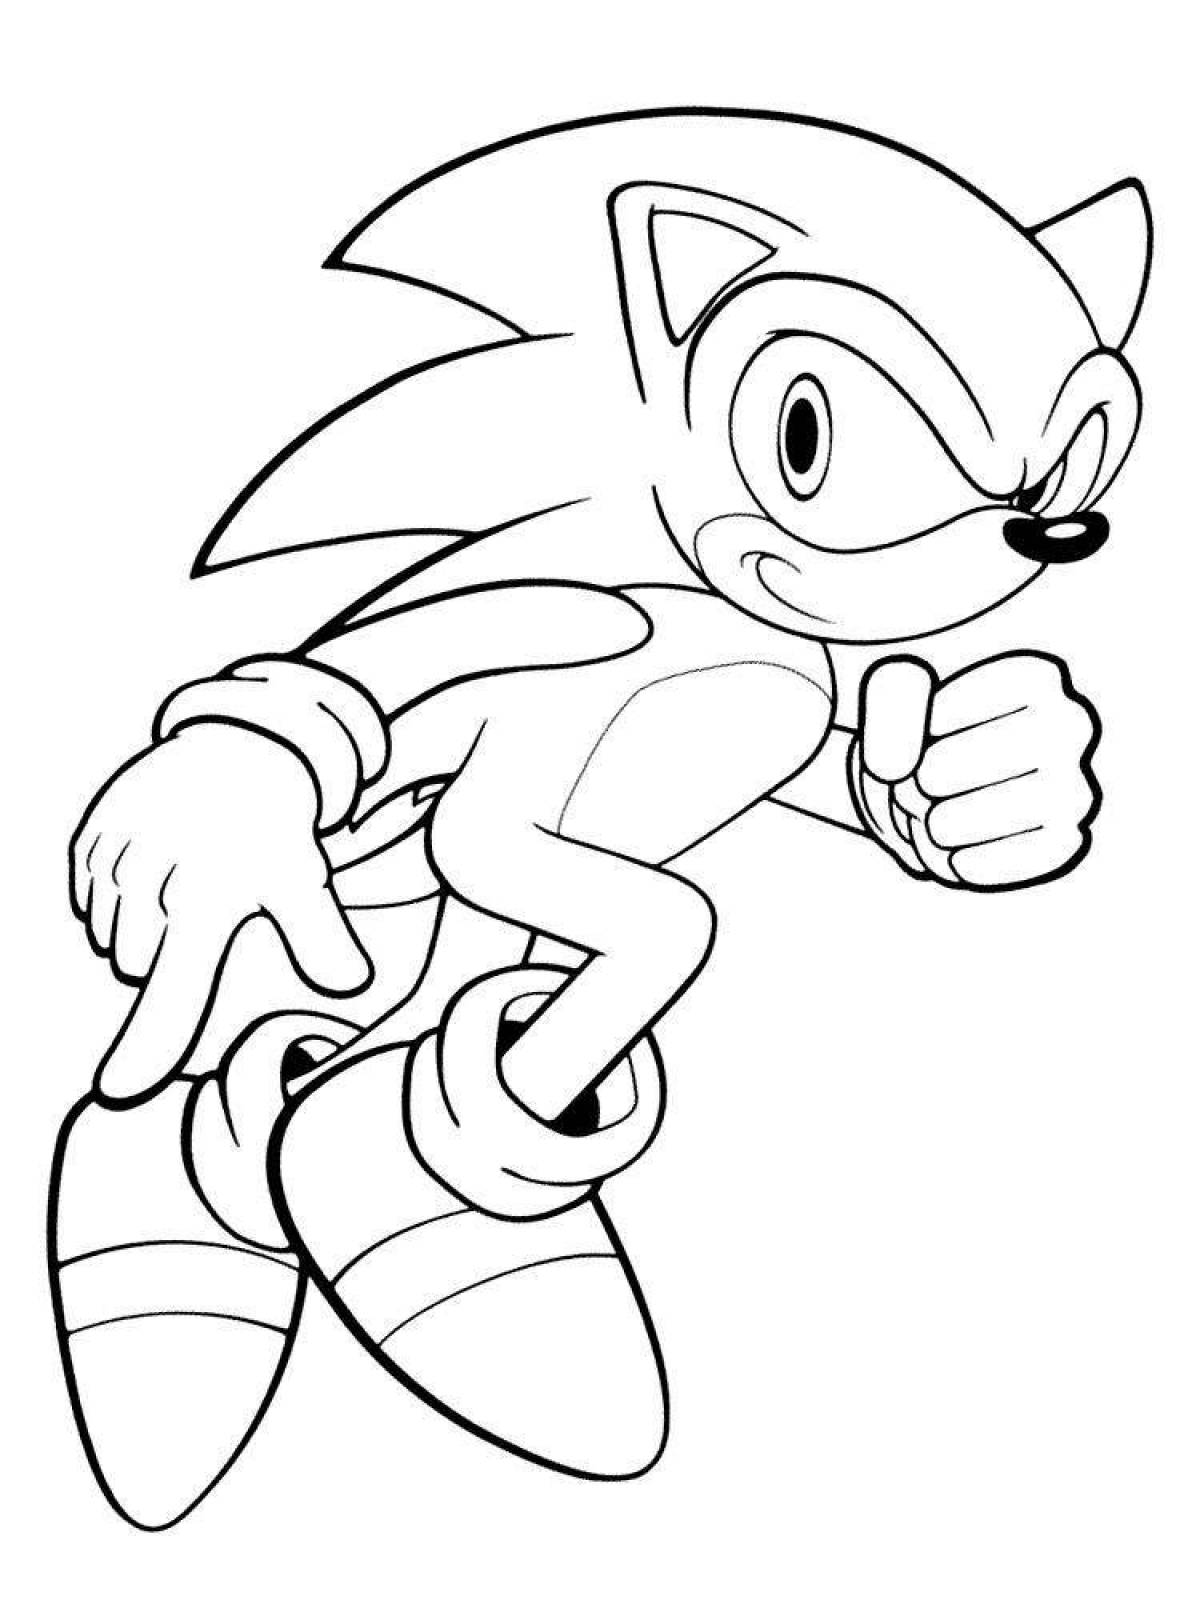 Fun coloring book for drawing sonic